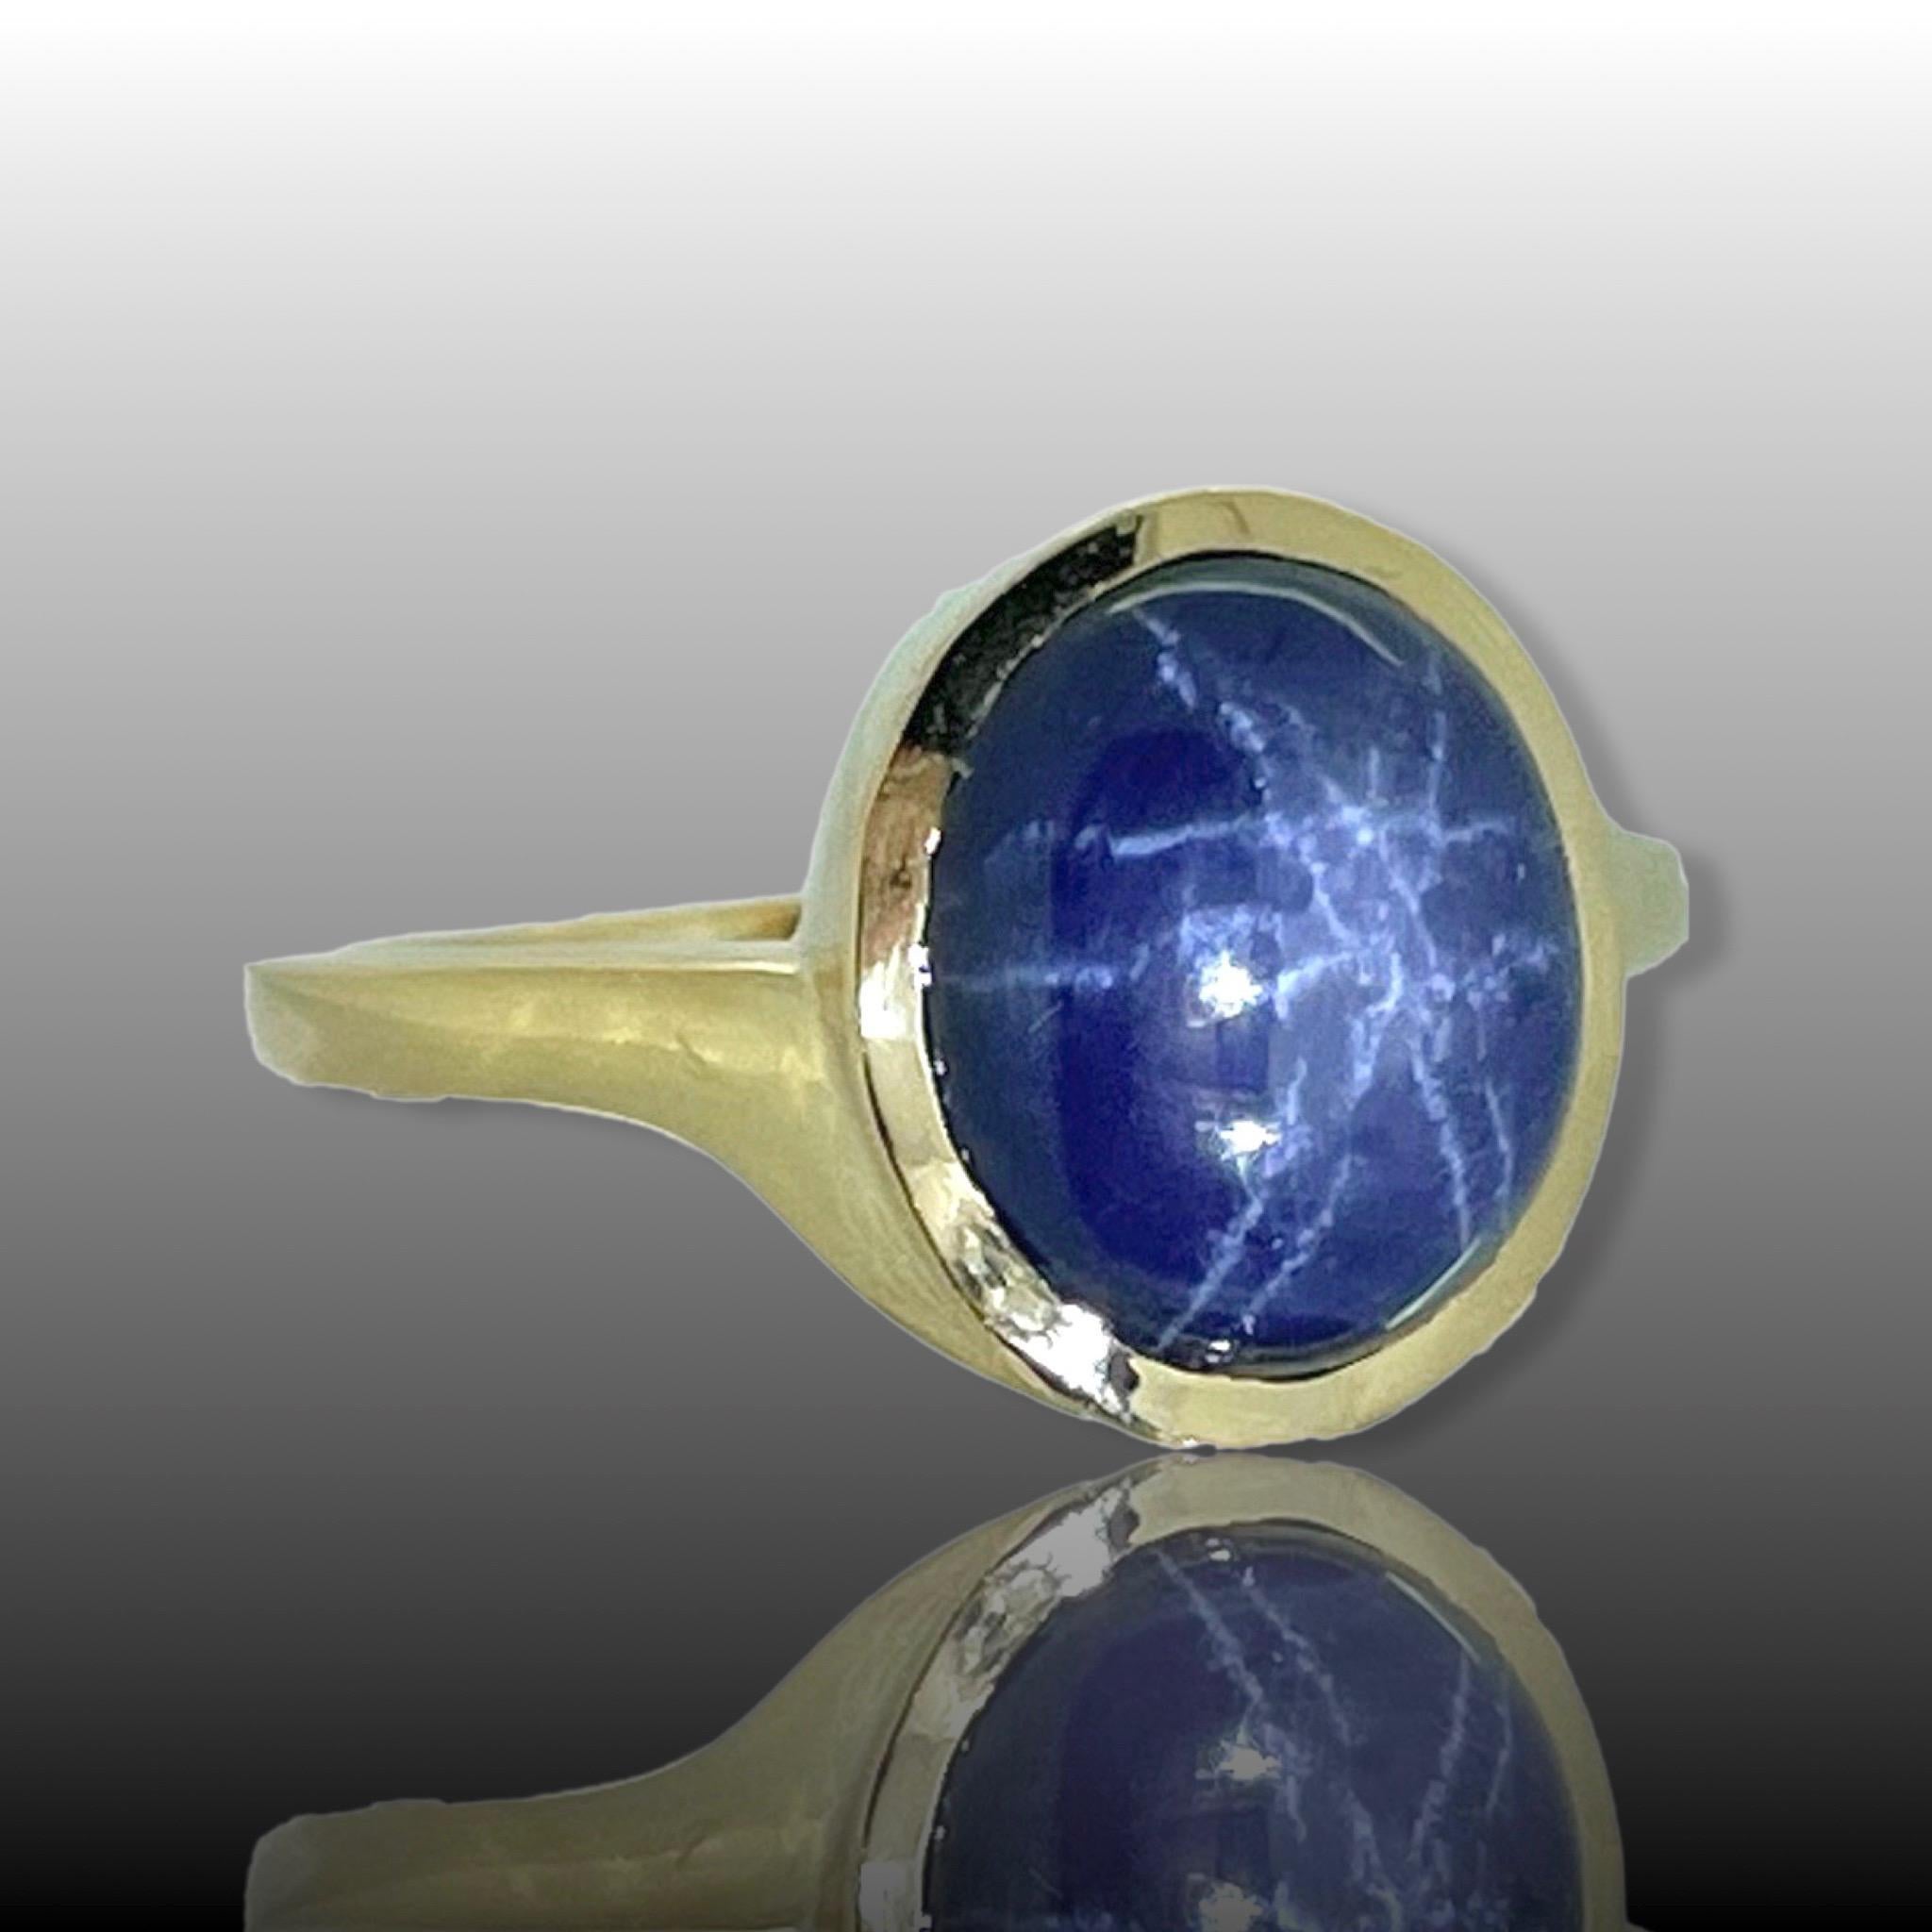 This beautiful ring is set with a vibrant blue Star sapphire of 7.42ct. We can see a star revealed under incandescent light. The ring is made in 18kt yellow gold and it is marked with the French owl. It is in excellent condition.
Weight: